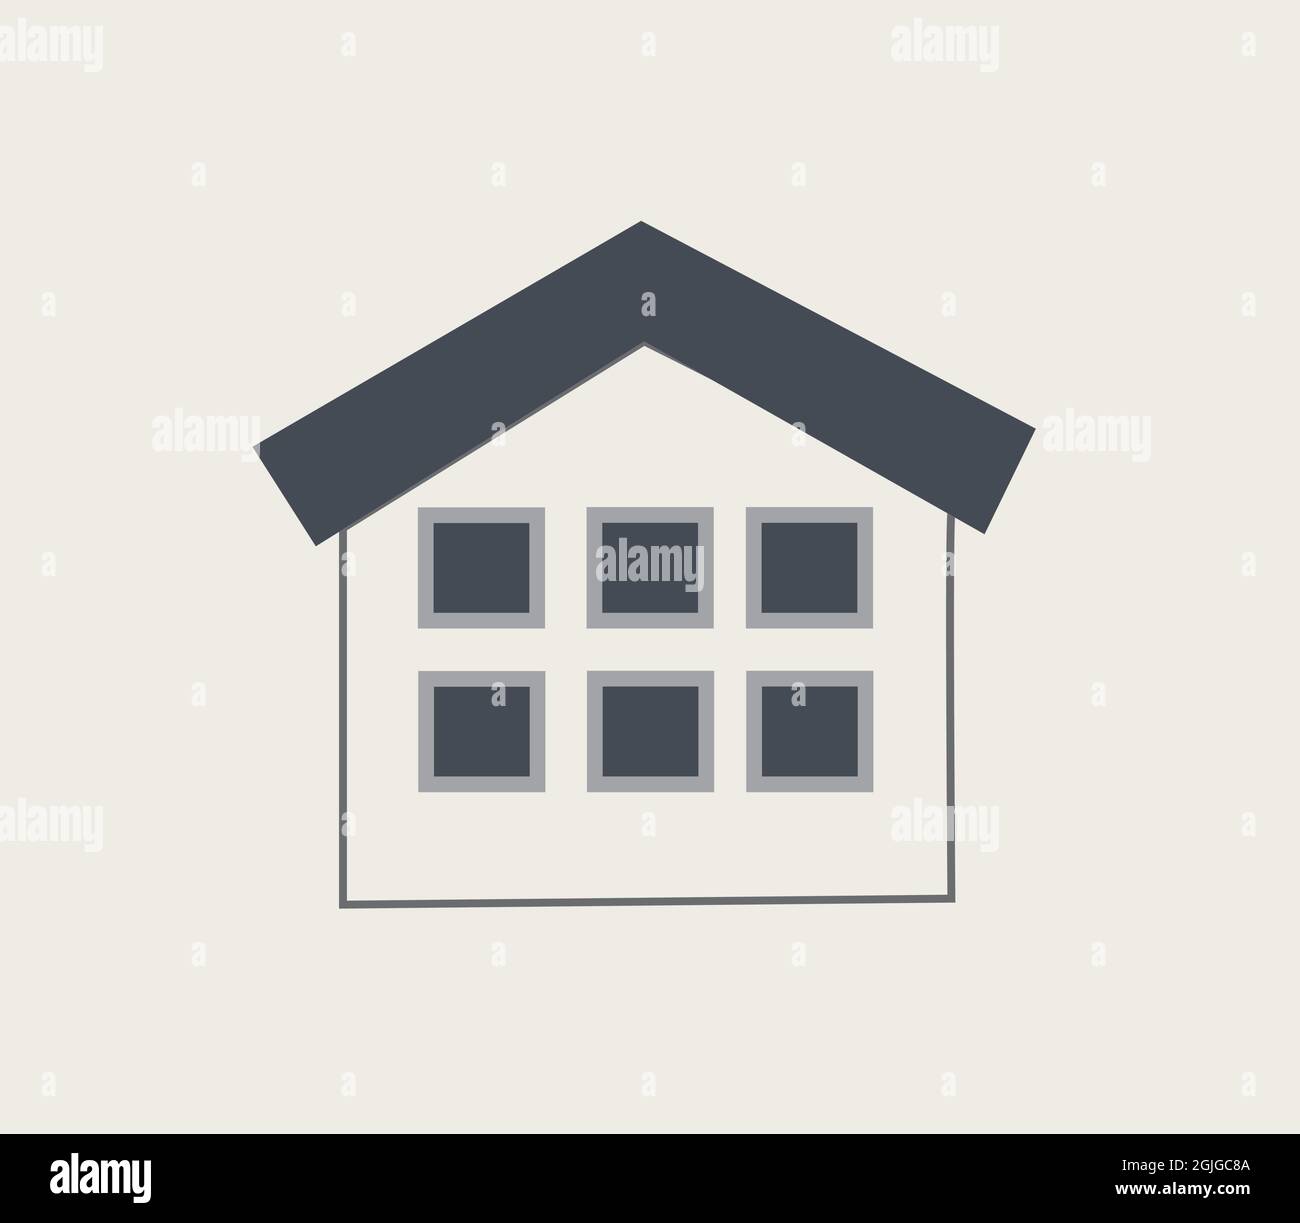 Isolated Building Flat Design Icon. Vector Illustration. Stock Vector